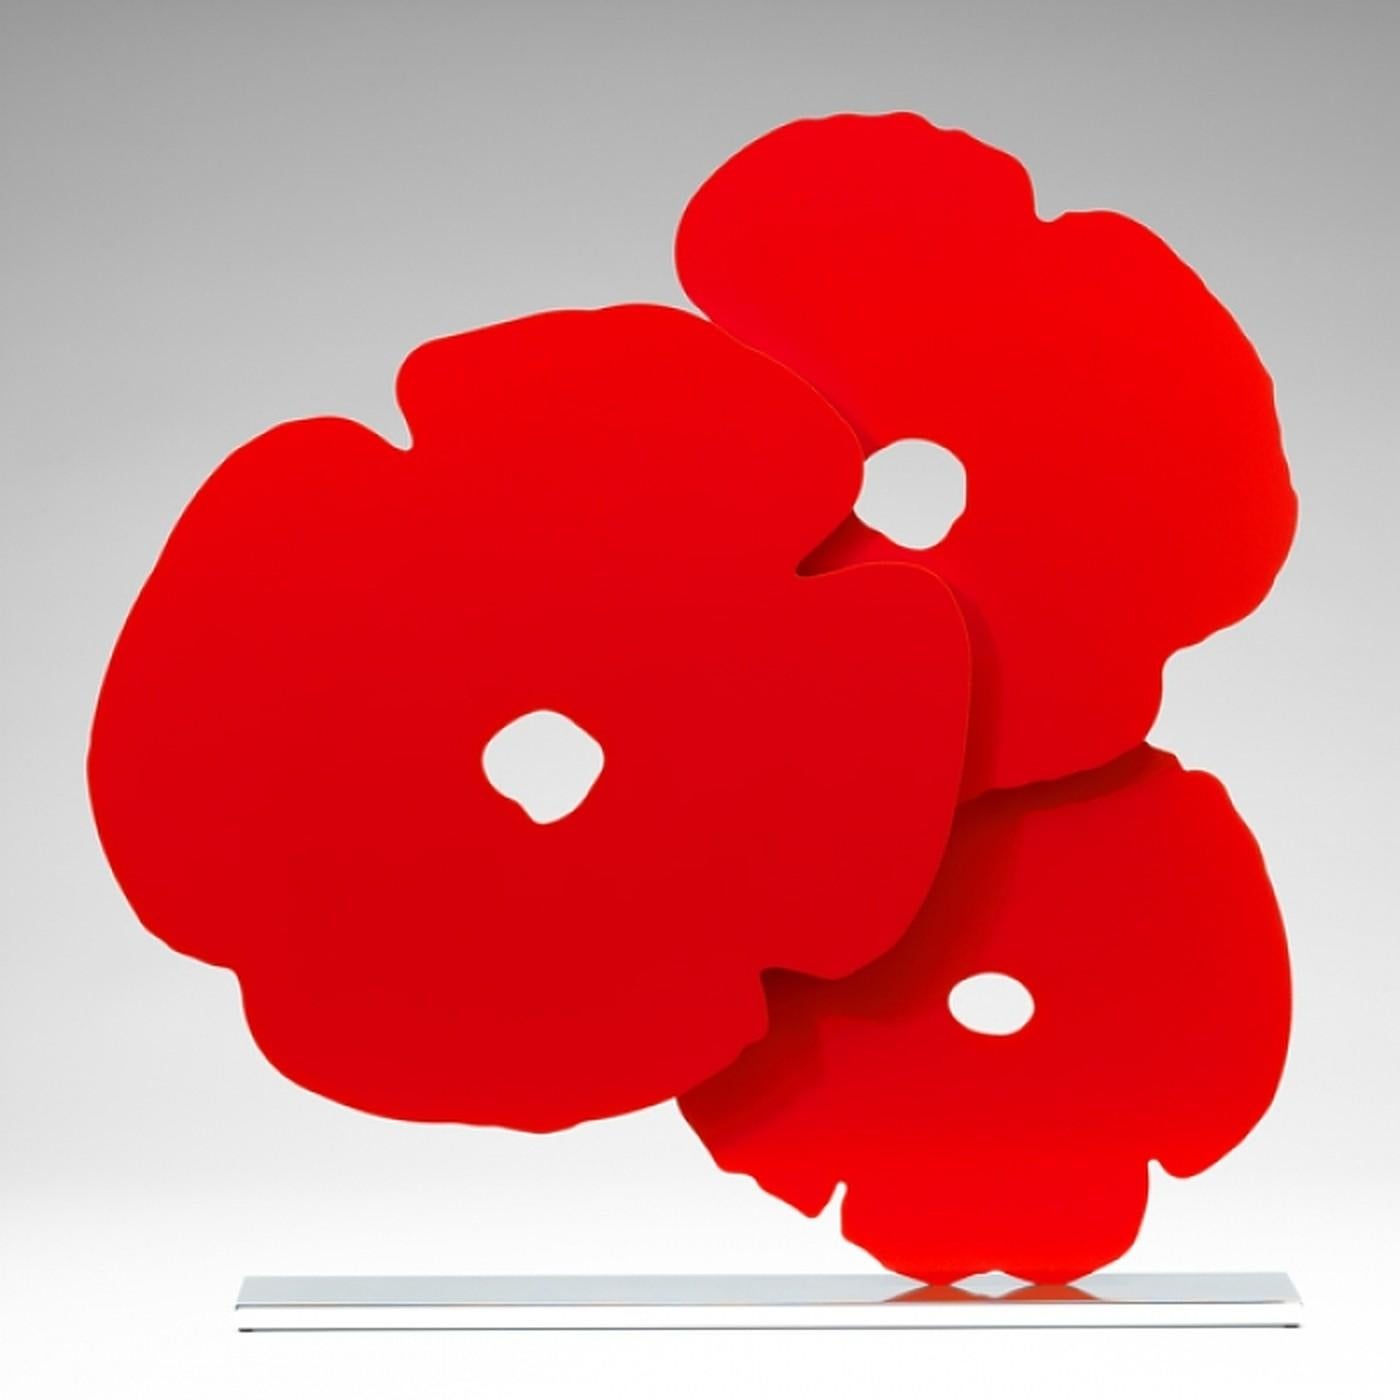 Donald Sultan Figurative Sculpture - Red Poppies - Contemporary, 21st Century, Sculpture, Poppies, Flower, Red